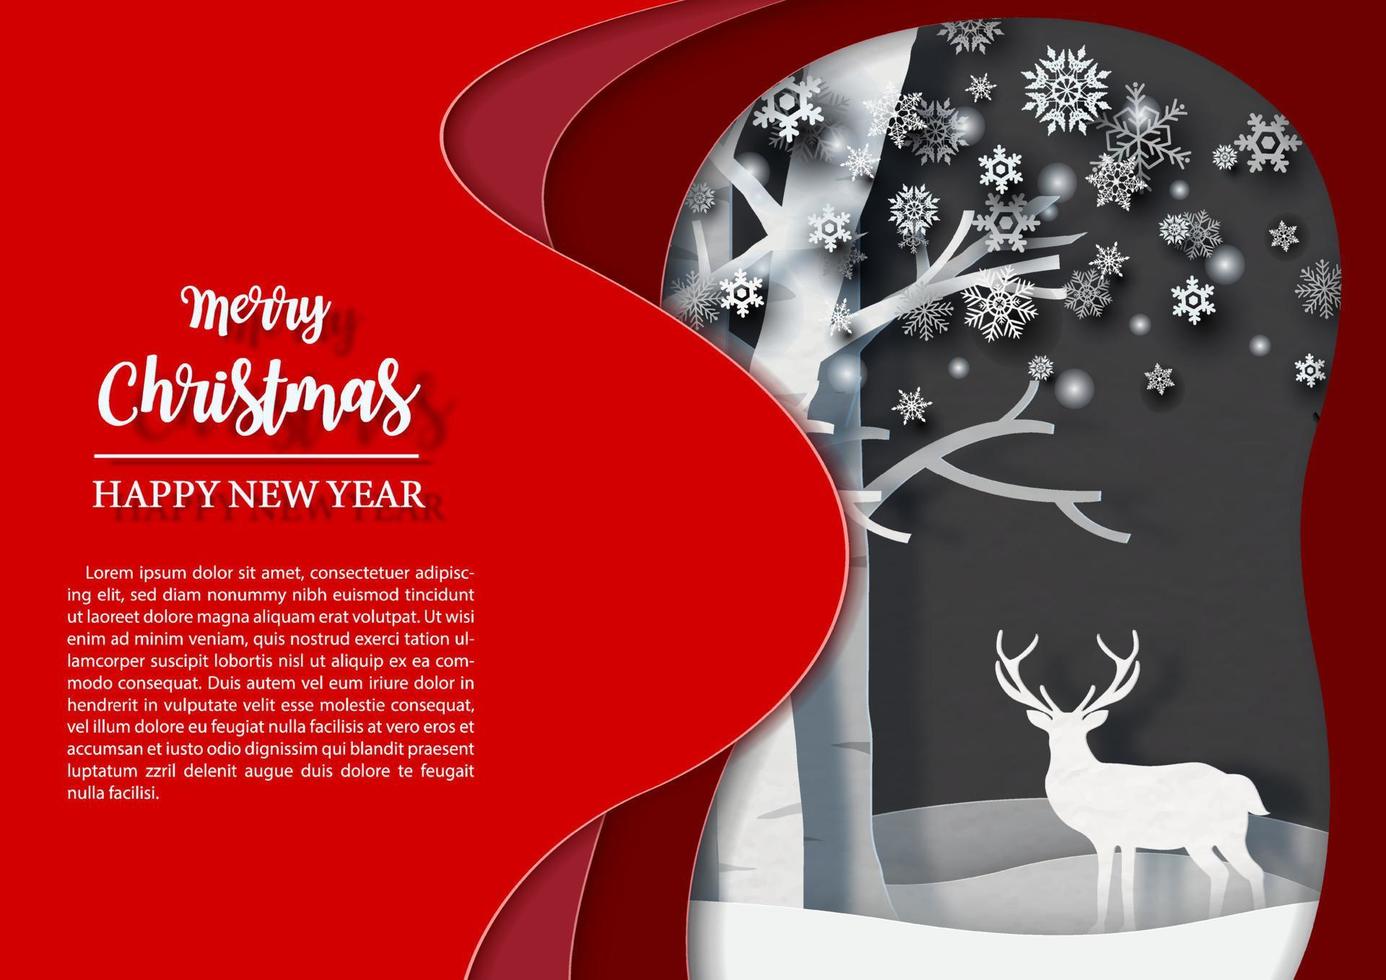 Closeup winter season with single reindeer  in red abstract shape and example texts on dark gray background. Christmas greeting card in paper cut style and vector design.